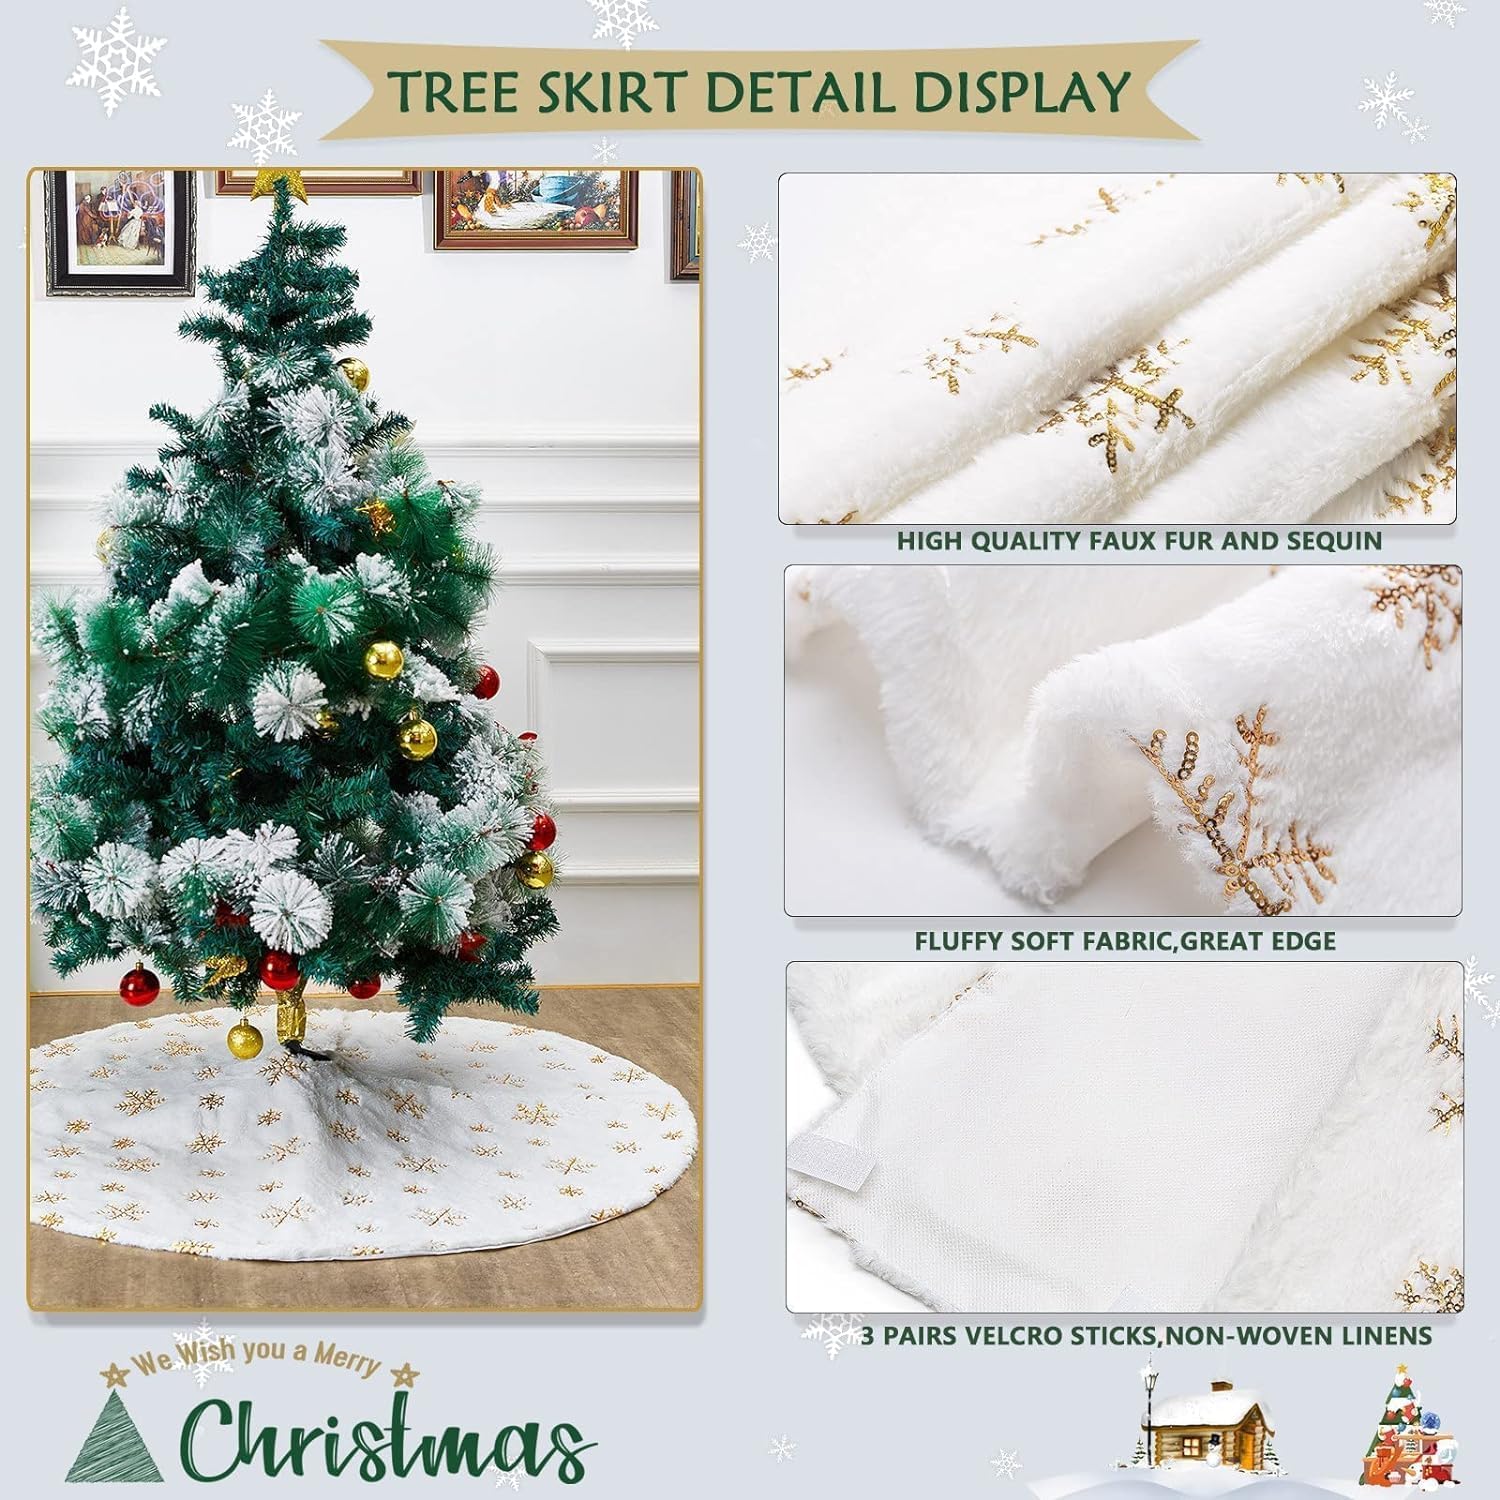 Pretocter Large Christmas Tree Skirt for Christmas Decorations Luxury Soft Plush Faux Fur Christmas Tree Mat Snowflakes Tree Skirt Xmas Tree Ornaments for Xmas Party Holiday Decorations 120CM-Gold